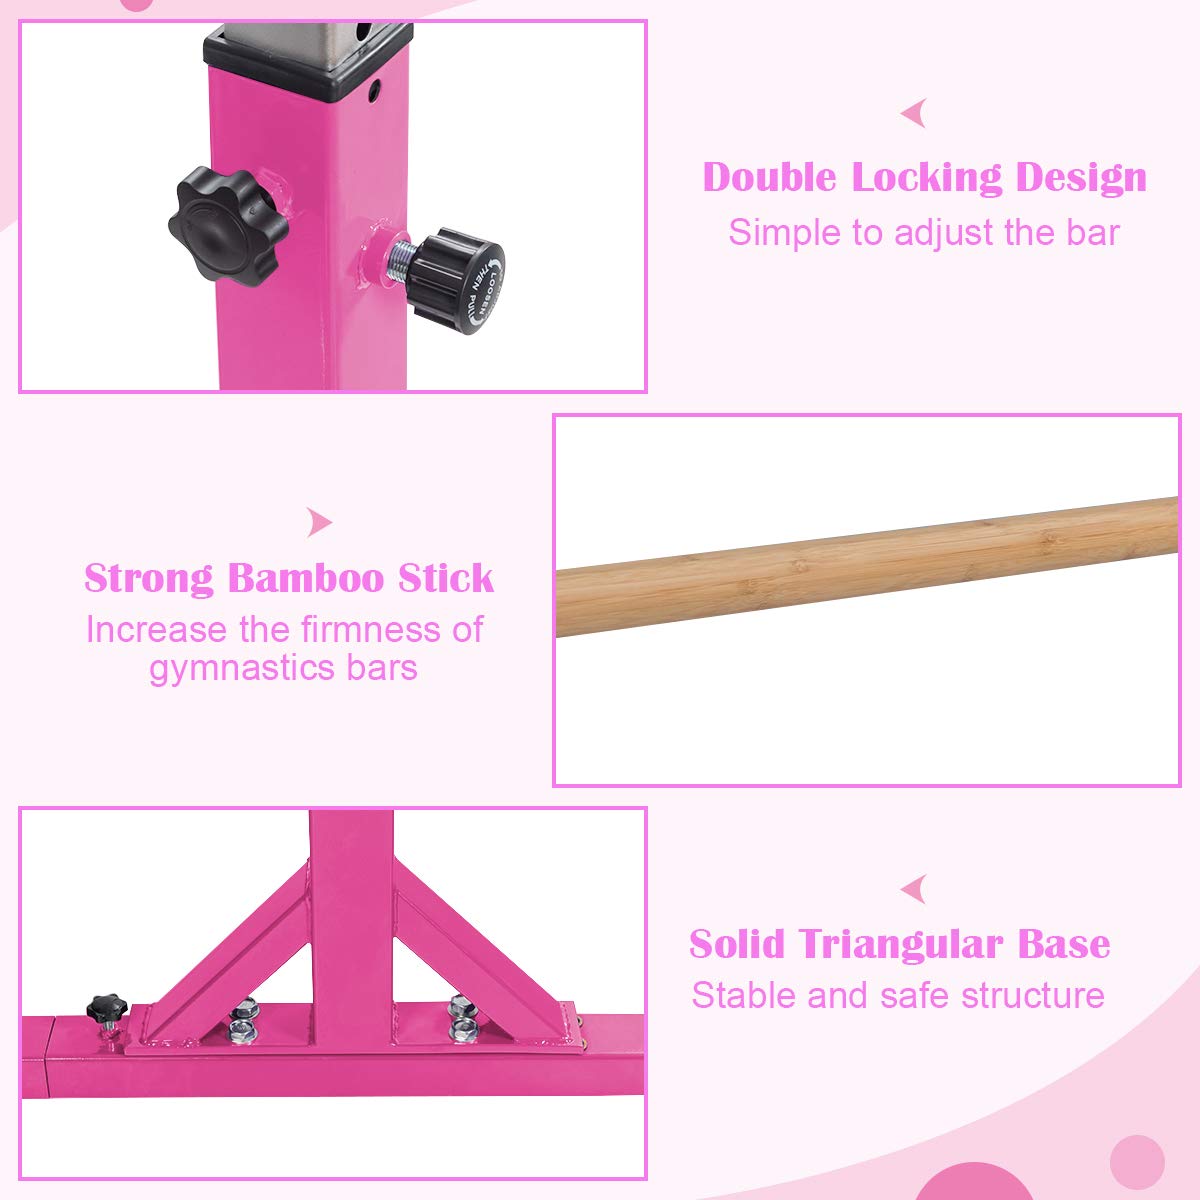 Gymnastics Parallel Bars, Double Horizontal Bar with Adjustable Width & 11-Level Heights, 120kg Weight Capacity